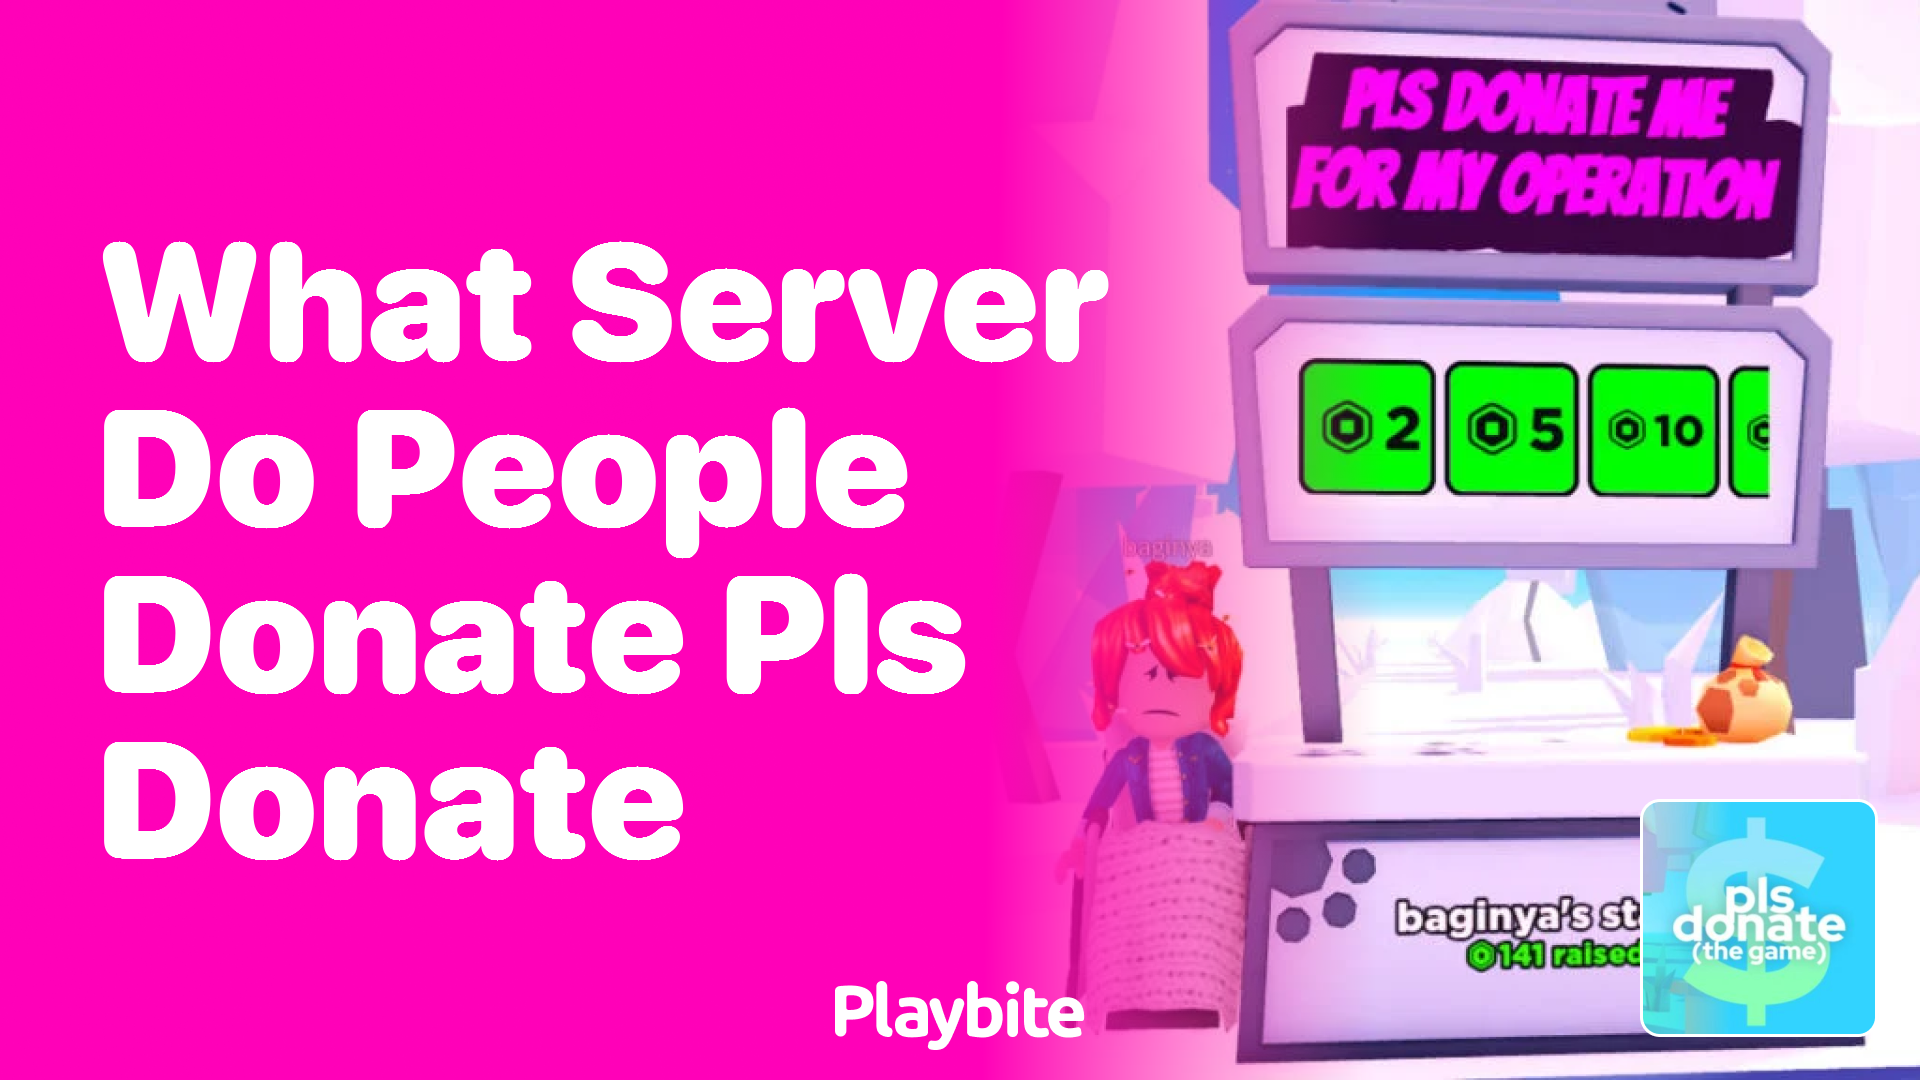 What Server Do People Use to Donate in PLS DONATE?